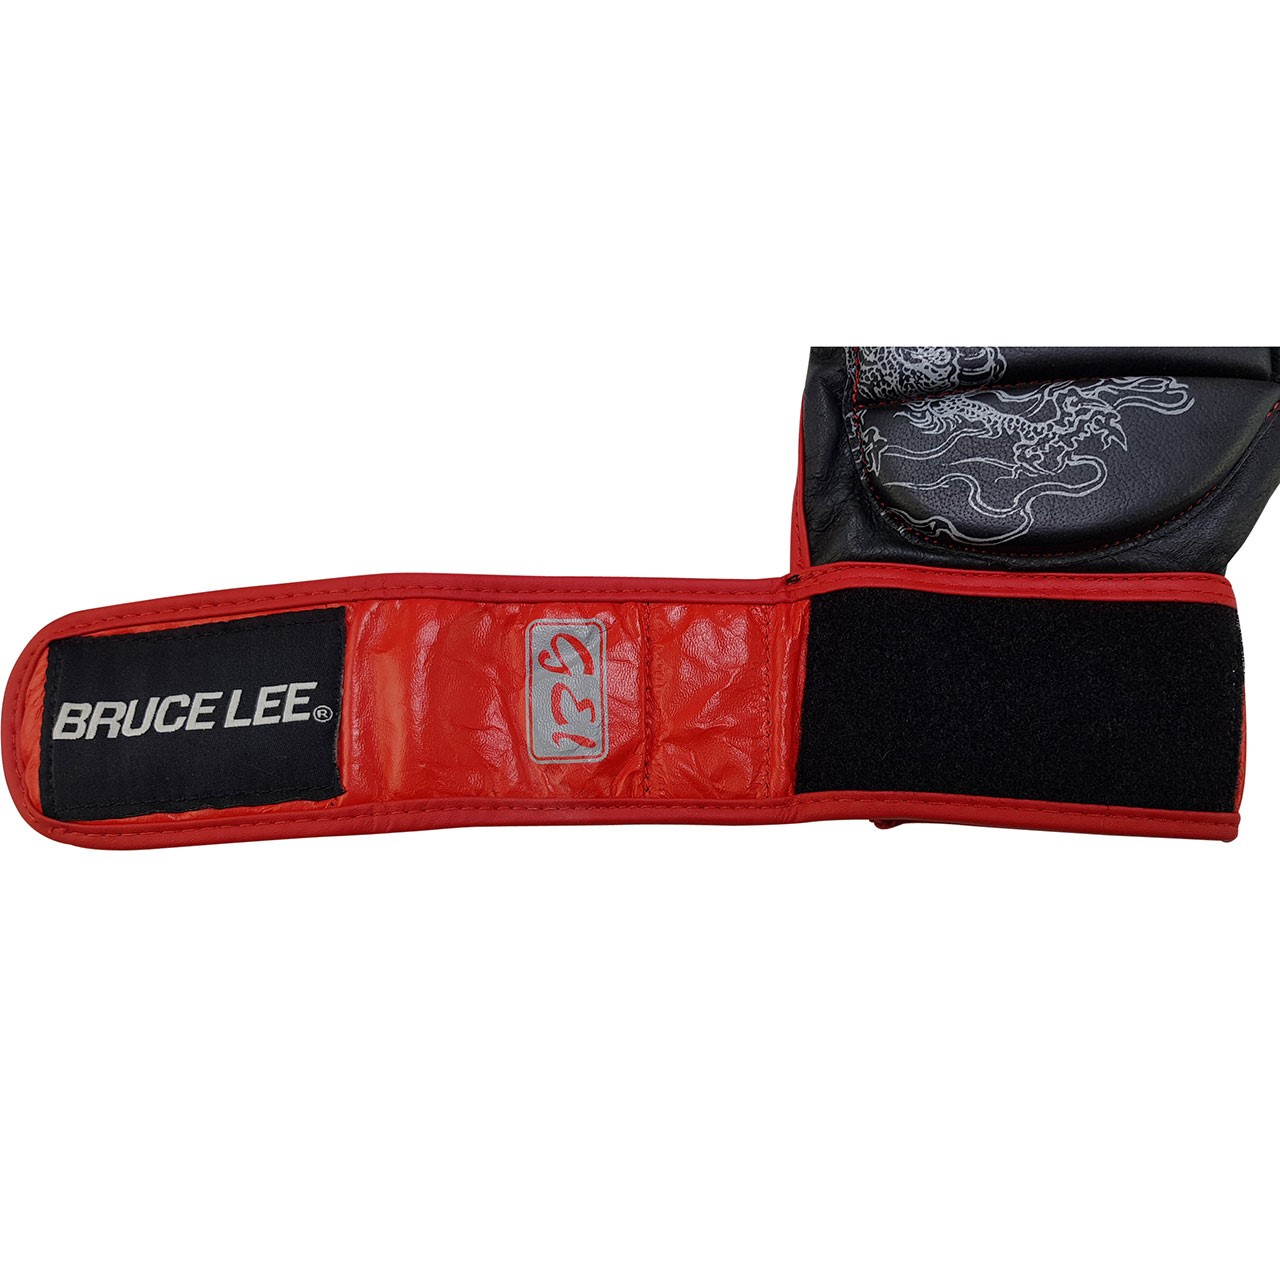 Bruce Lee MMA Martial Arts Boxhandschuhe Deluxe